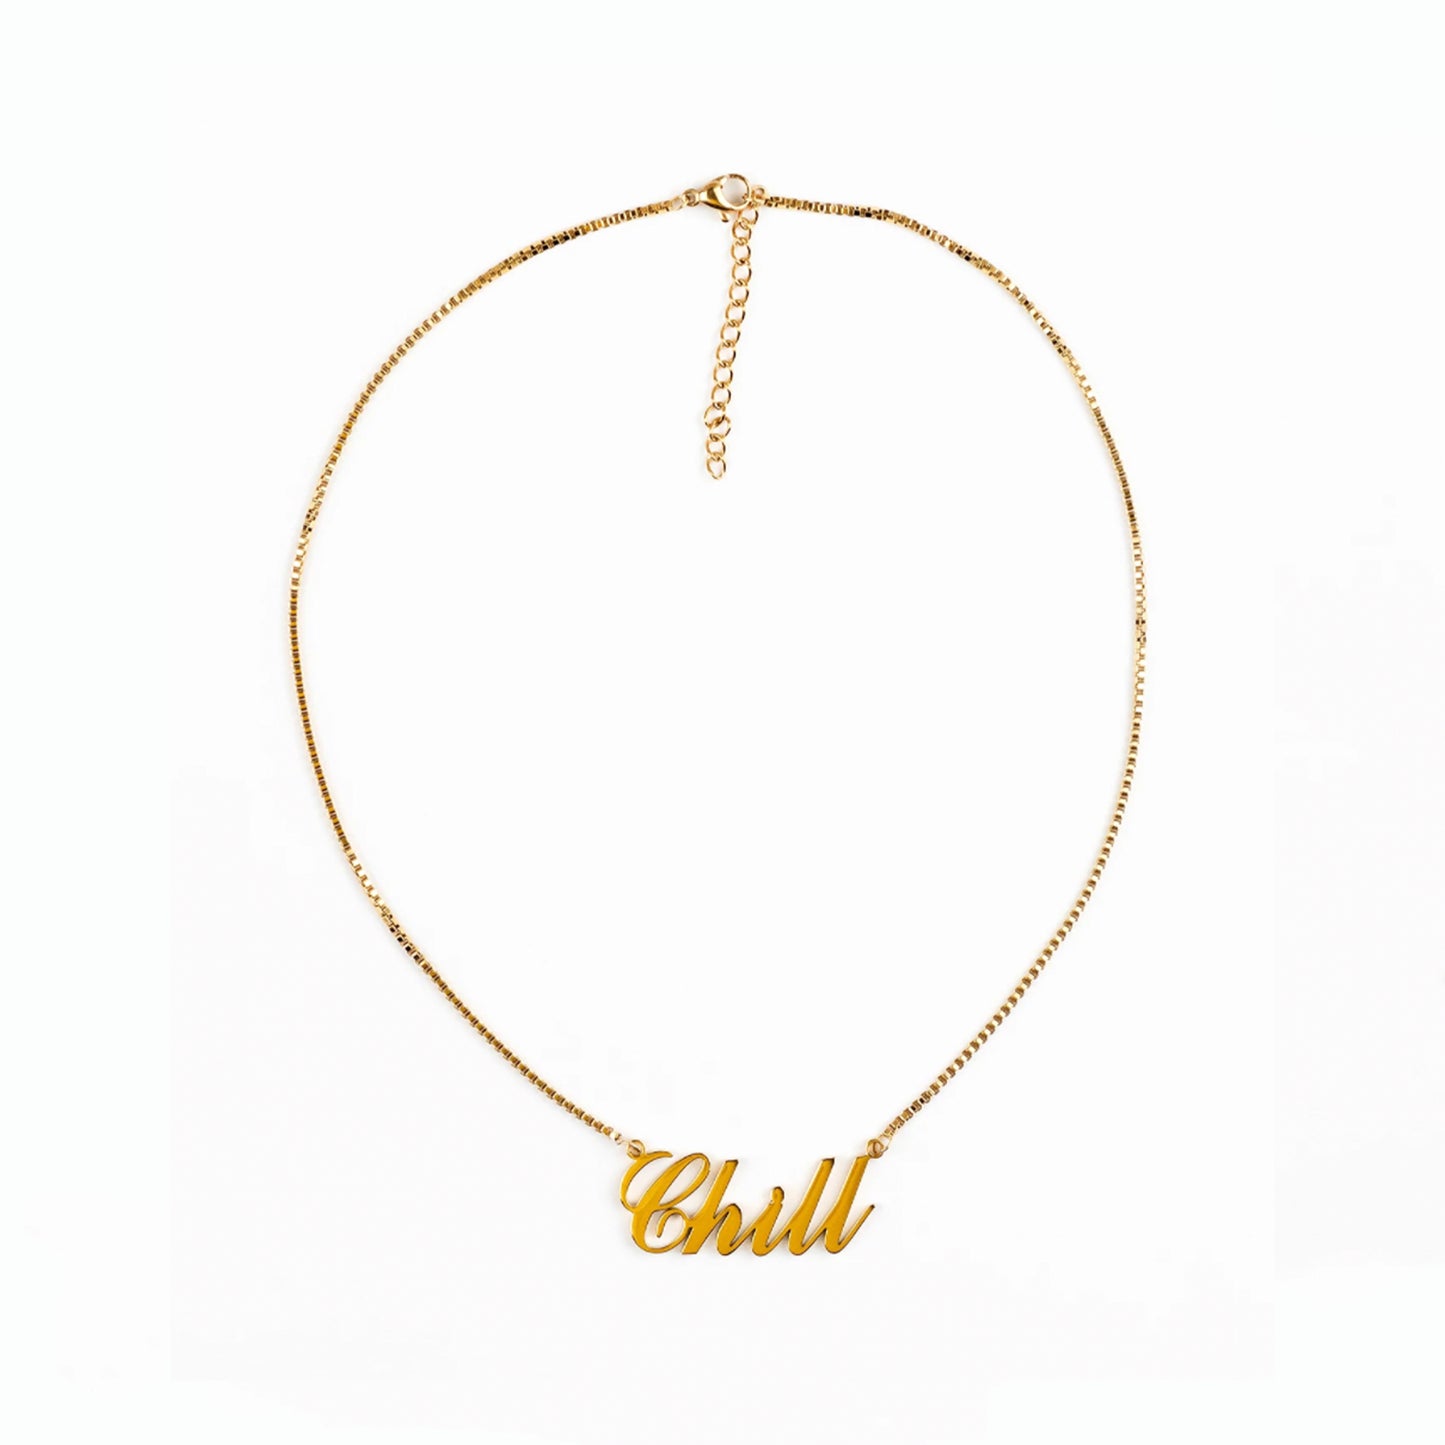 Word Necklaces. Adjustable 14-16" gold plated necklace perfect for layering!